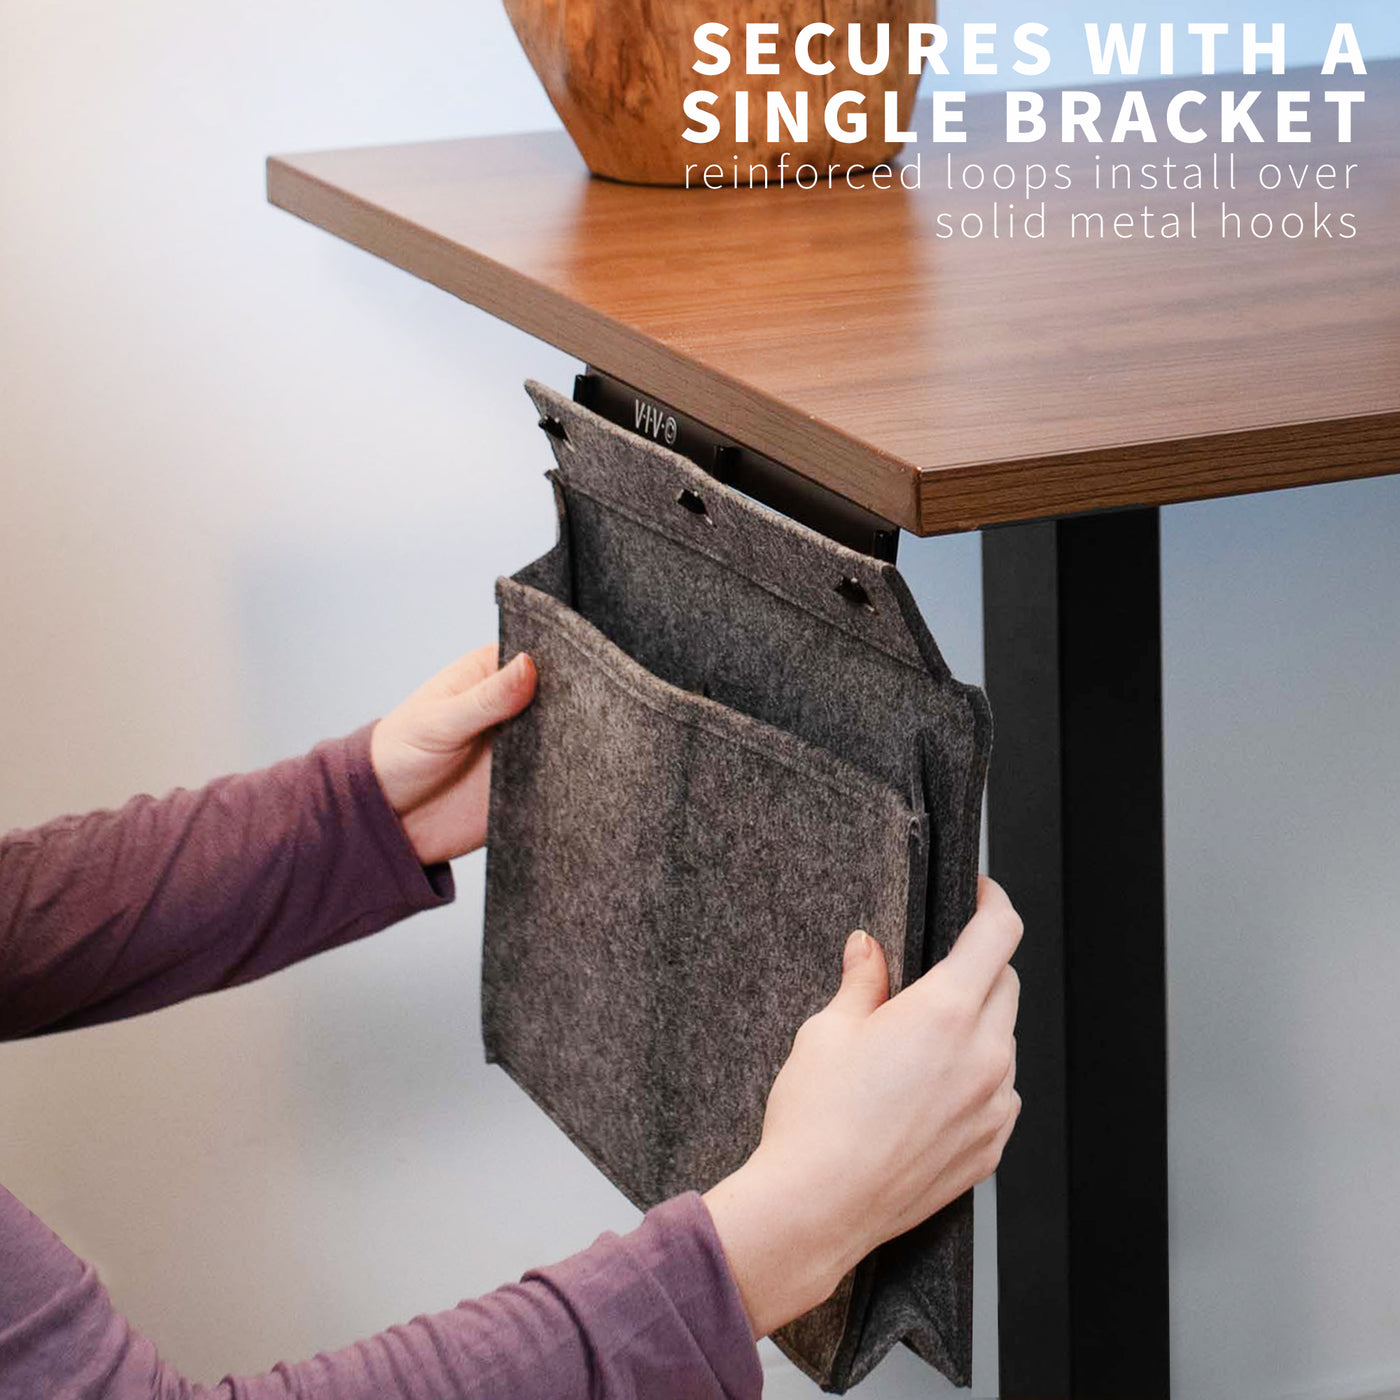 Easy installation by securing a single bracket underneath the desk.